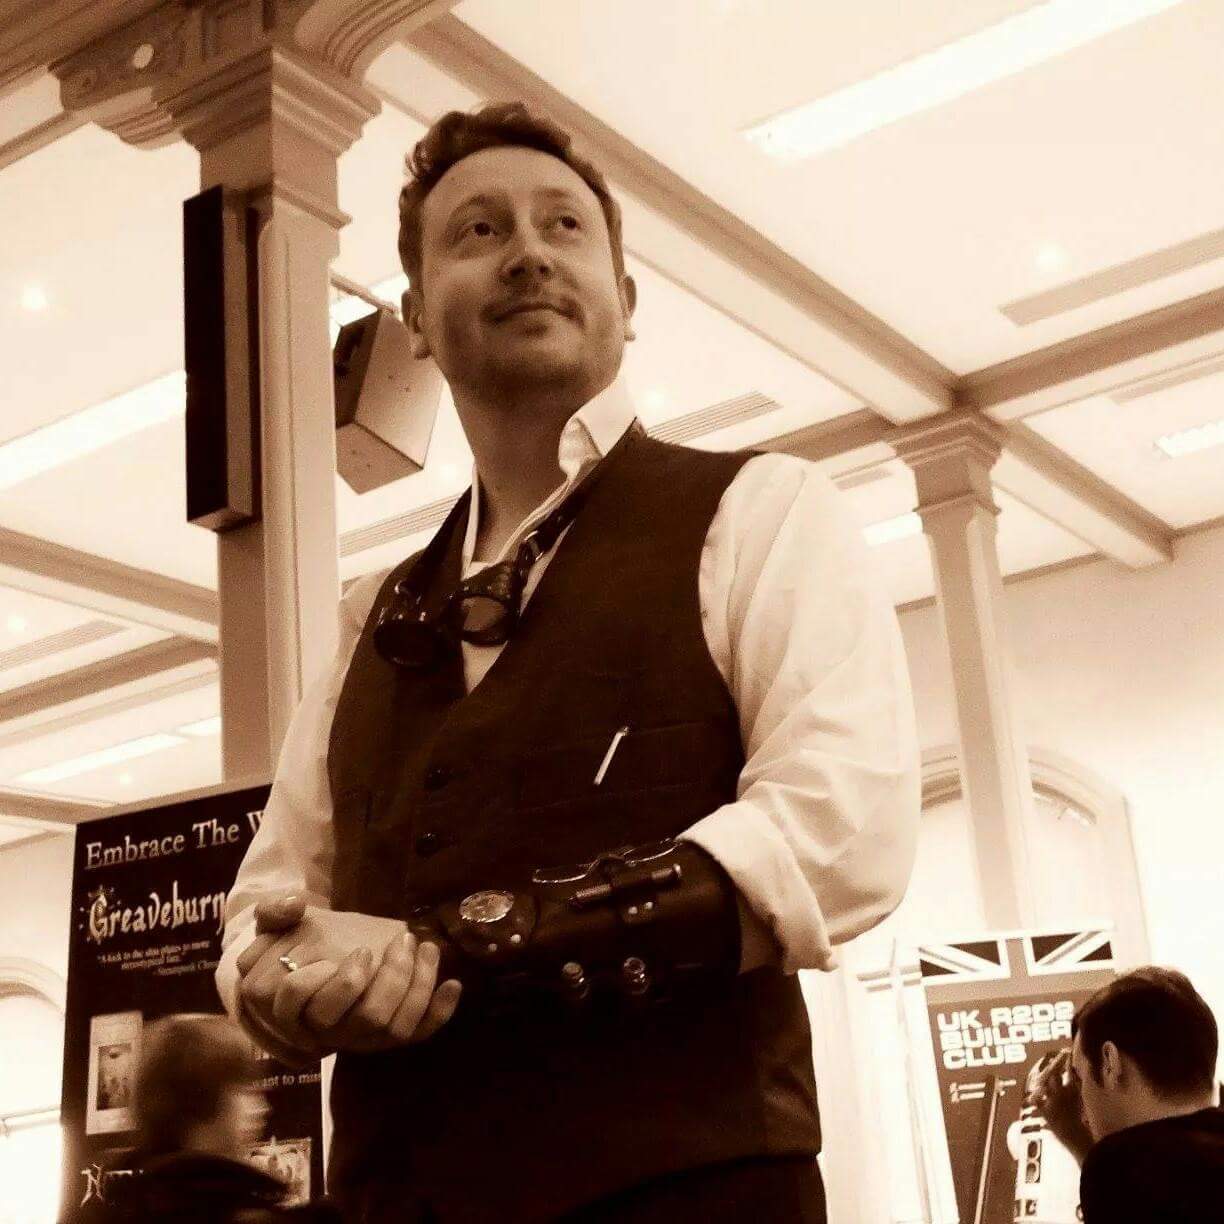 Author Craig Hallam wearing steampunk outfit and looking away from the camera